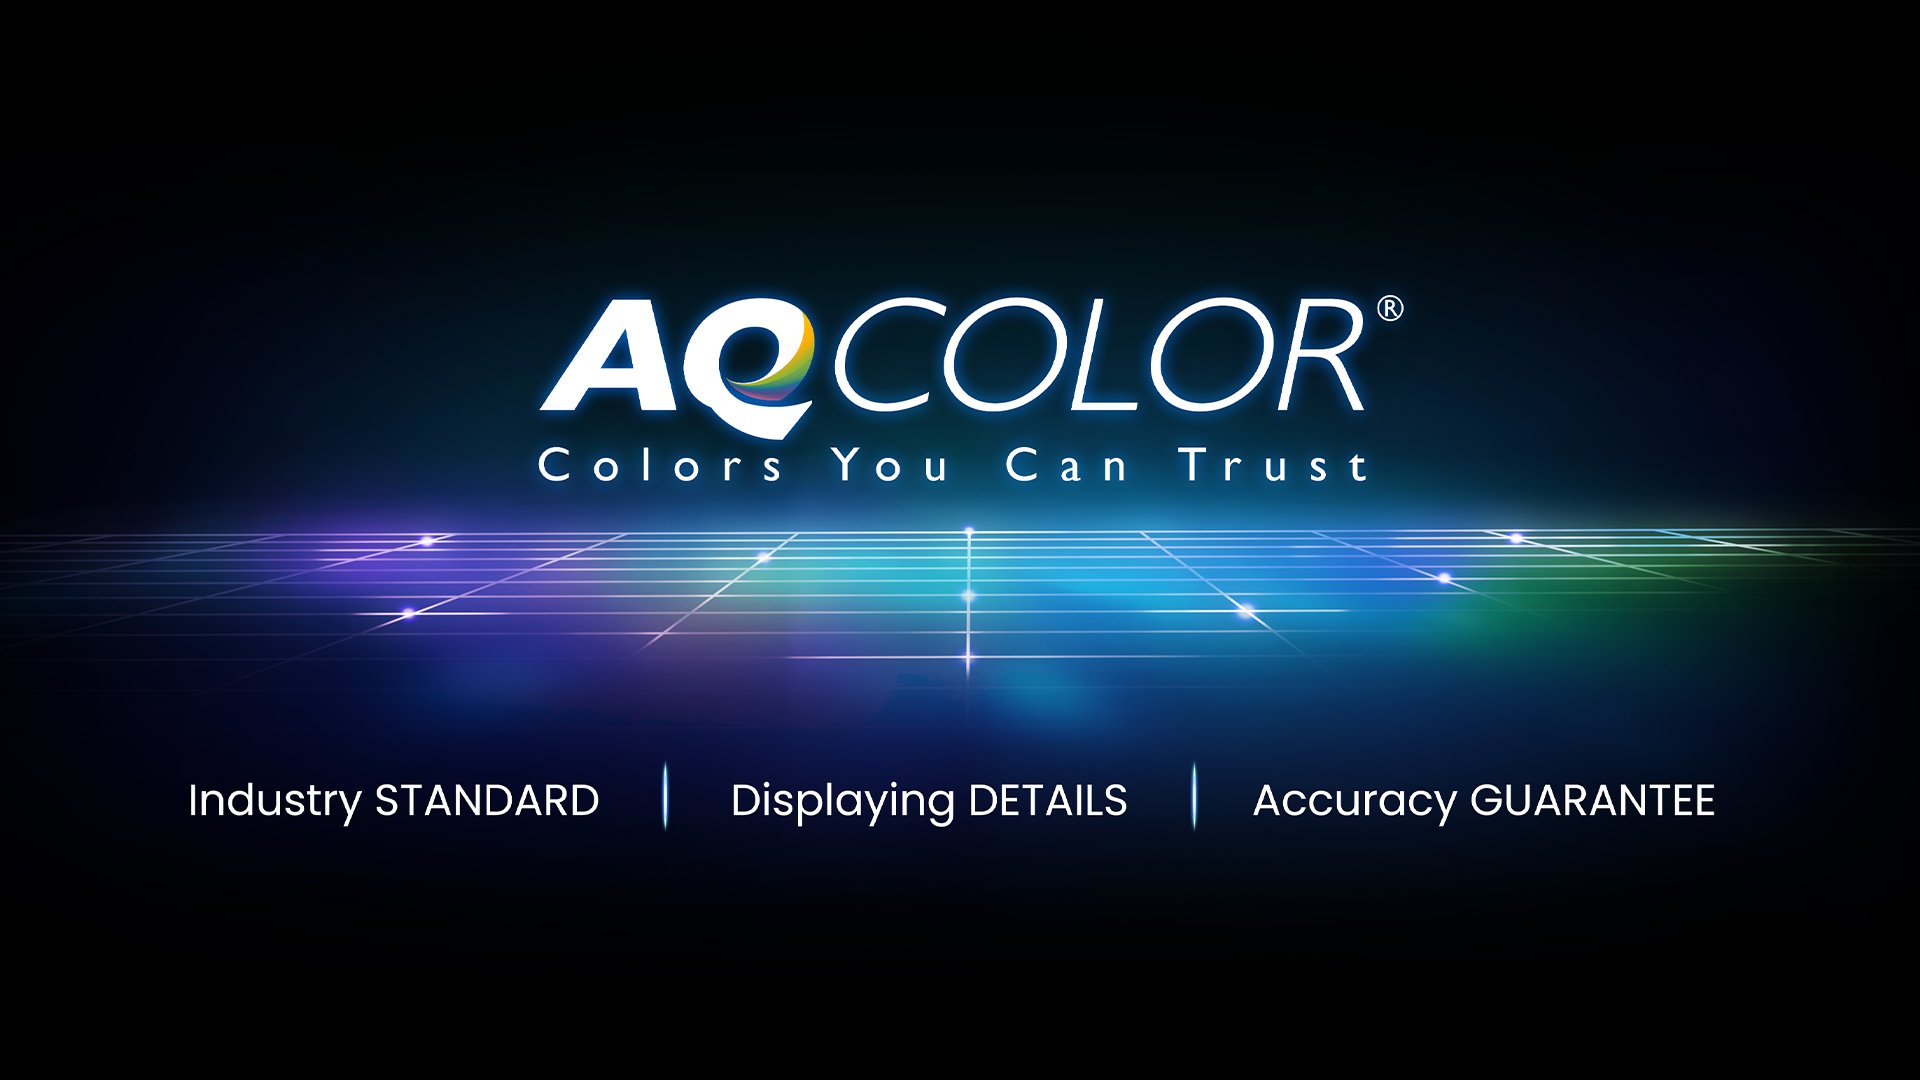 BenQ AQCOLOR technology delivers Accurate Reproduction. This translates to the display of color precisely as it is intended to appear. Led by a color expert, the BenQ team took part in the ICC and ISO to establish color-related standards and implementation guidelines.